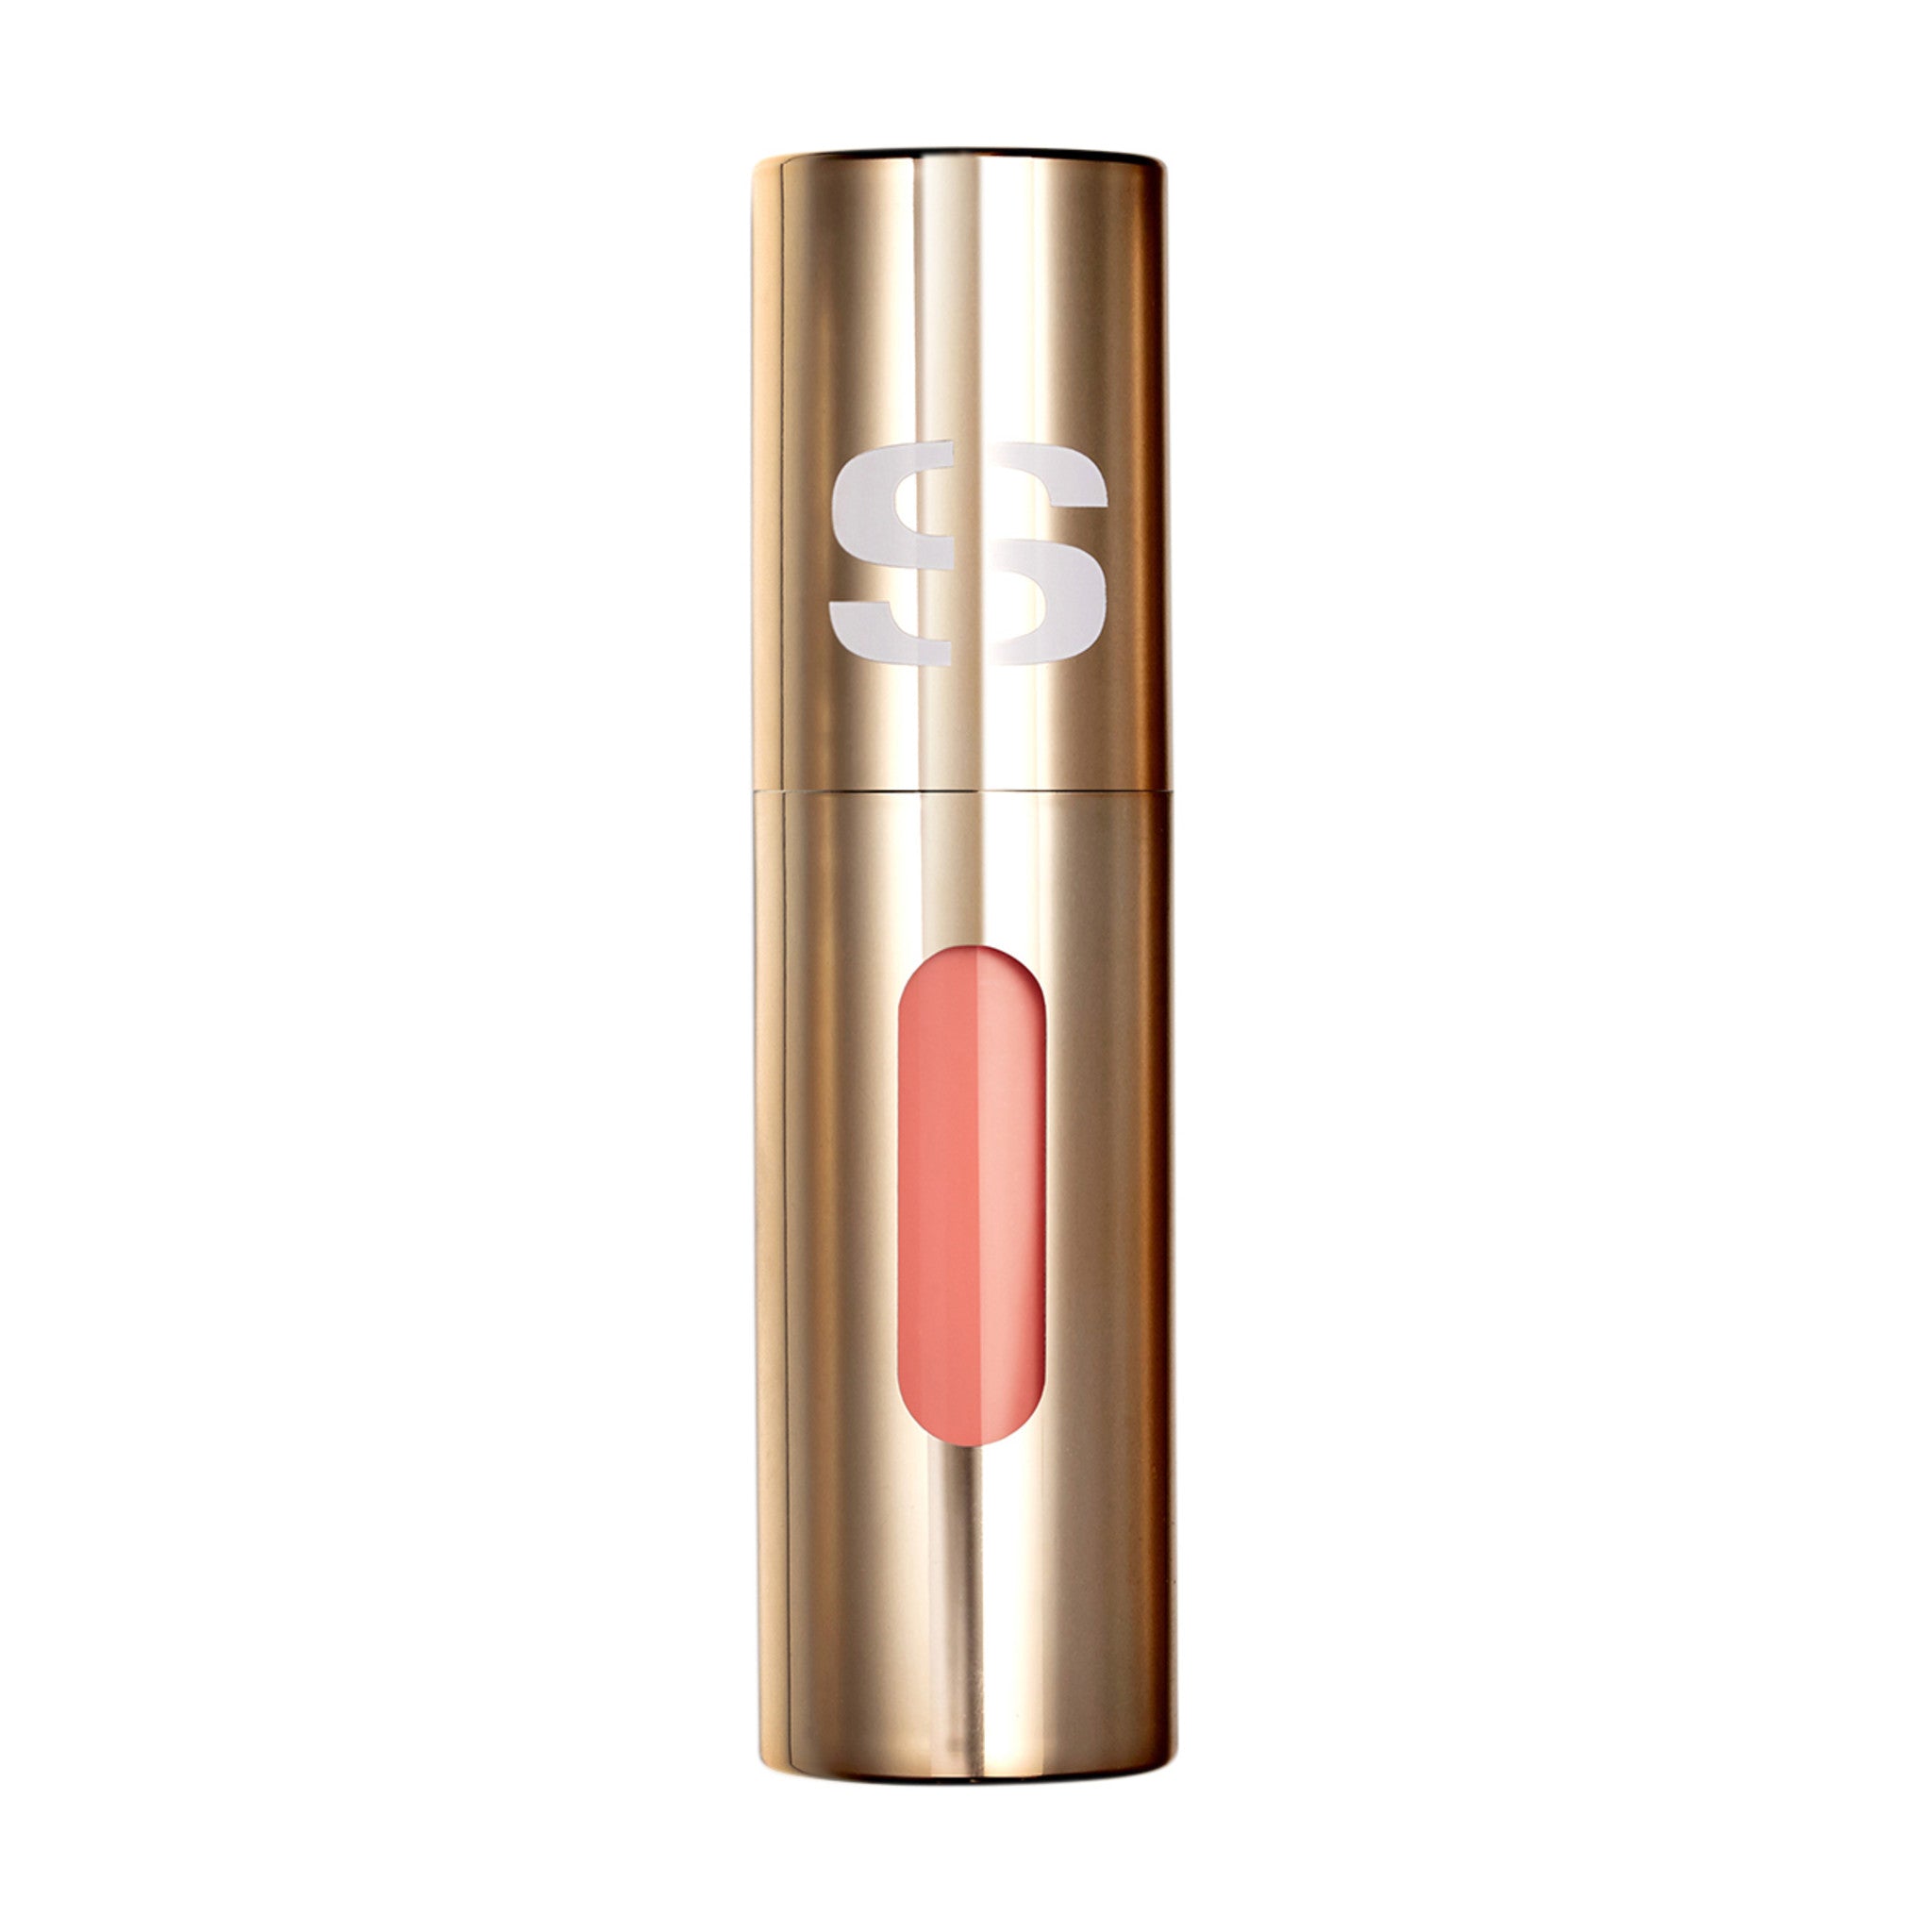 Sisley-Paris Phyto-Lip Delight Color/Shade variant: 3 Sweet main image. This product is in the color orange